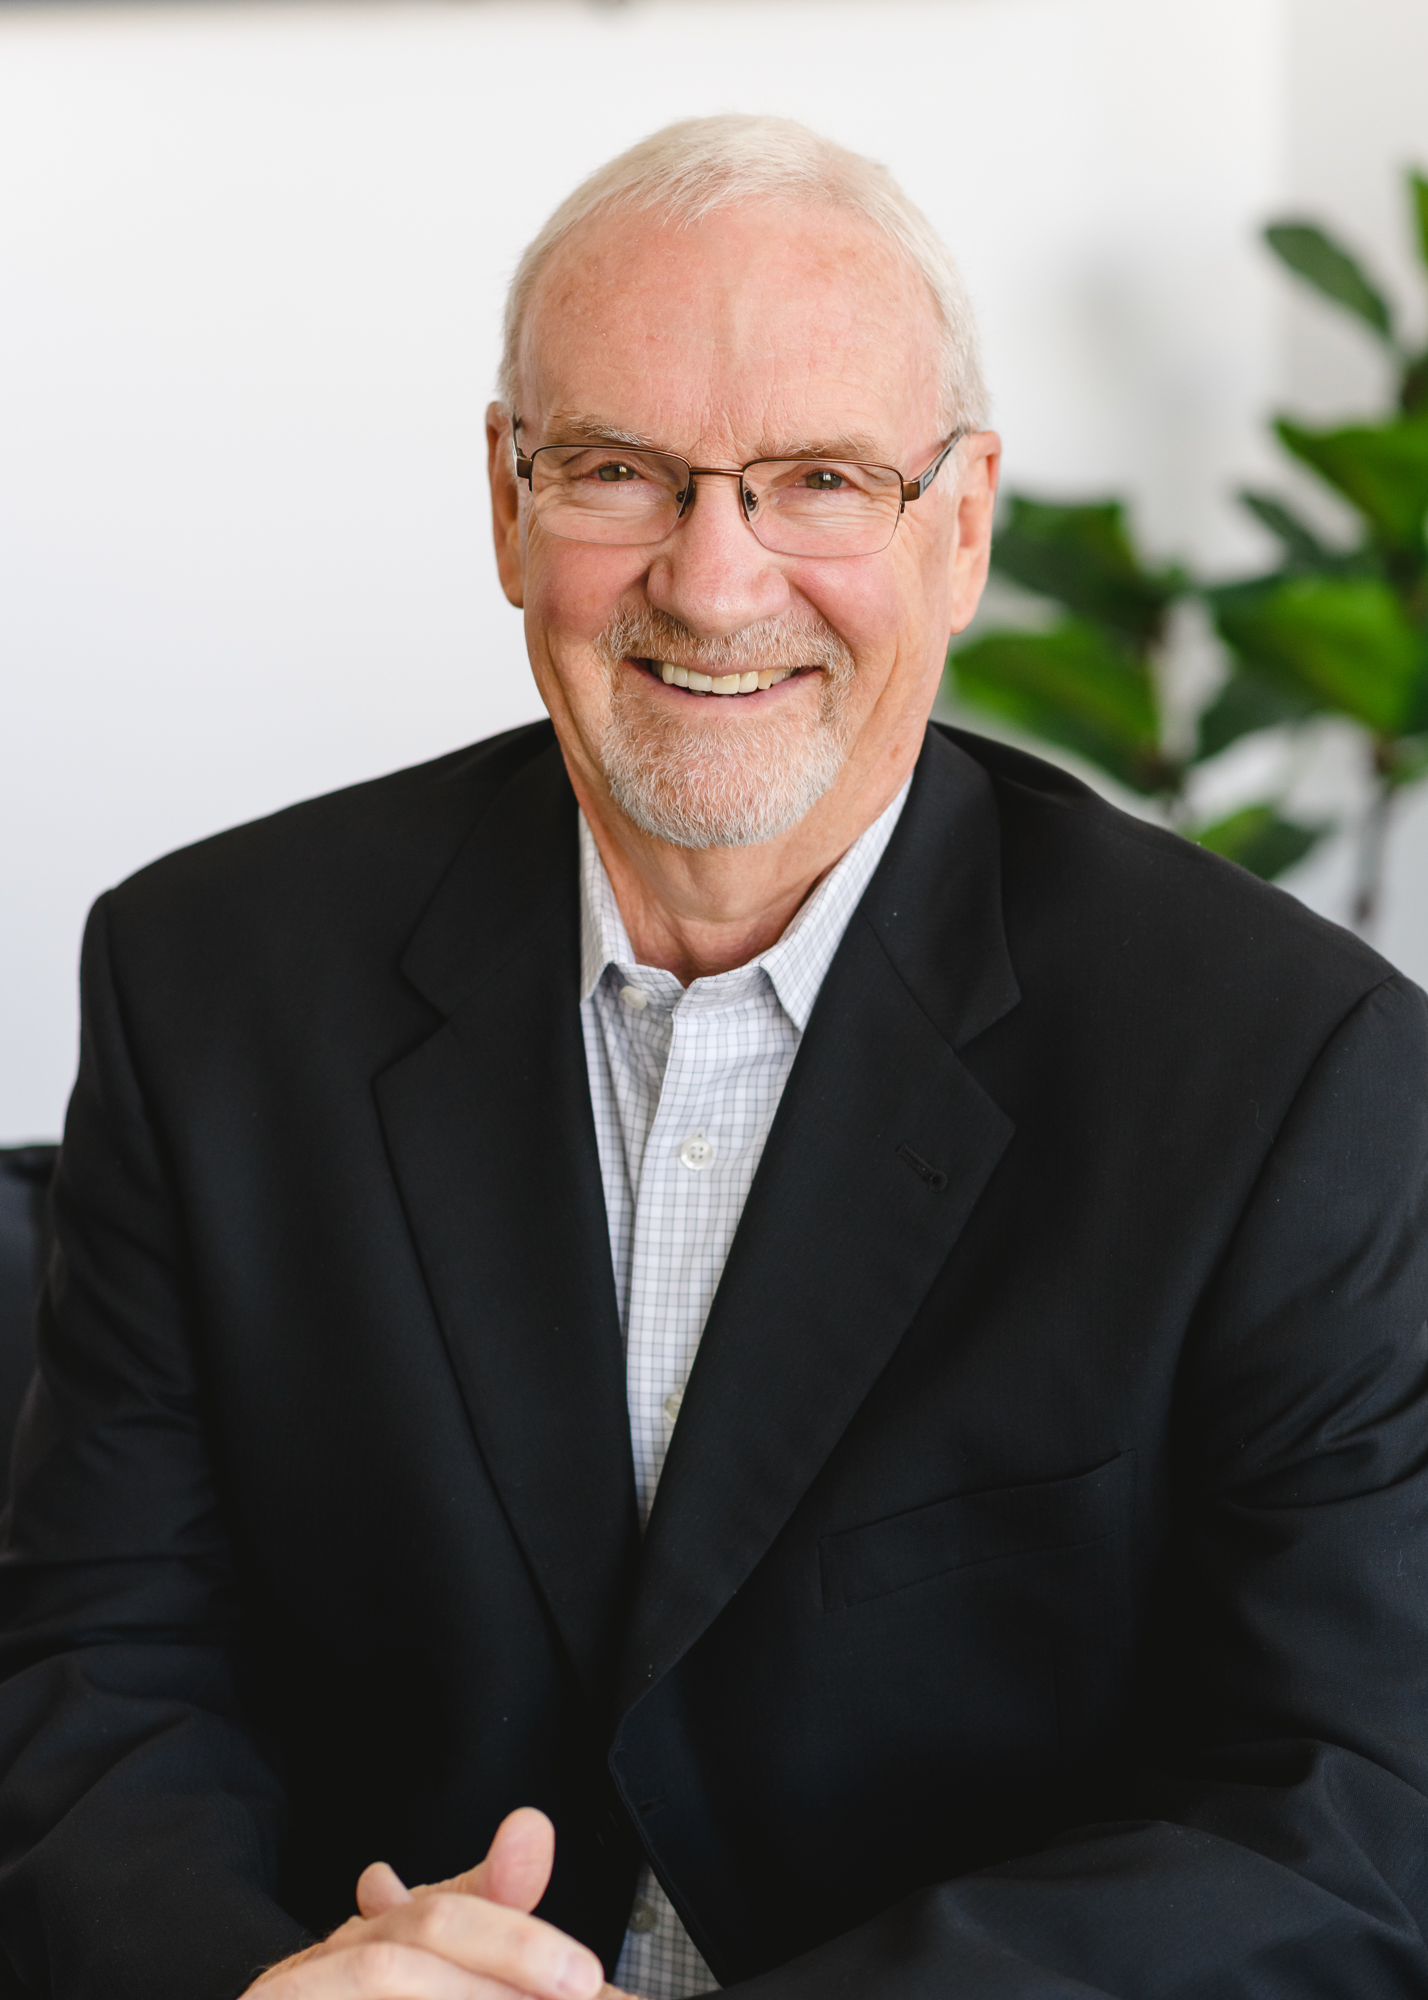 Corporate Headshot of man in his sixties